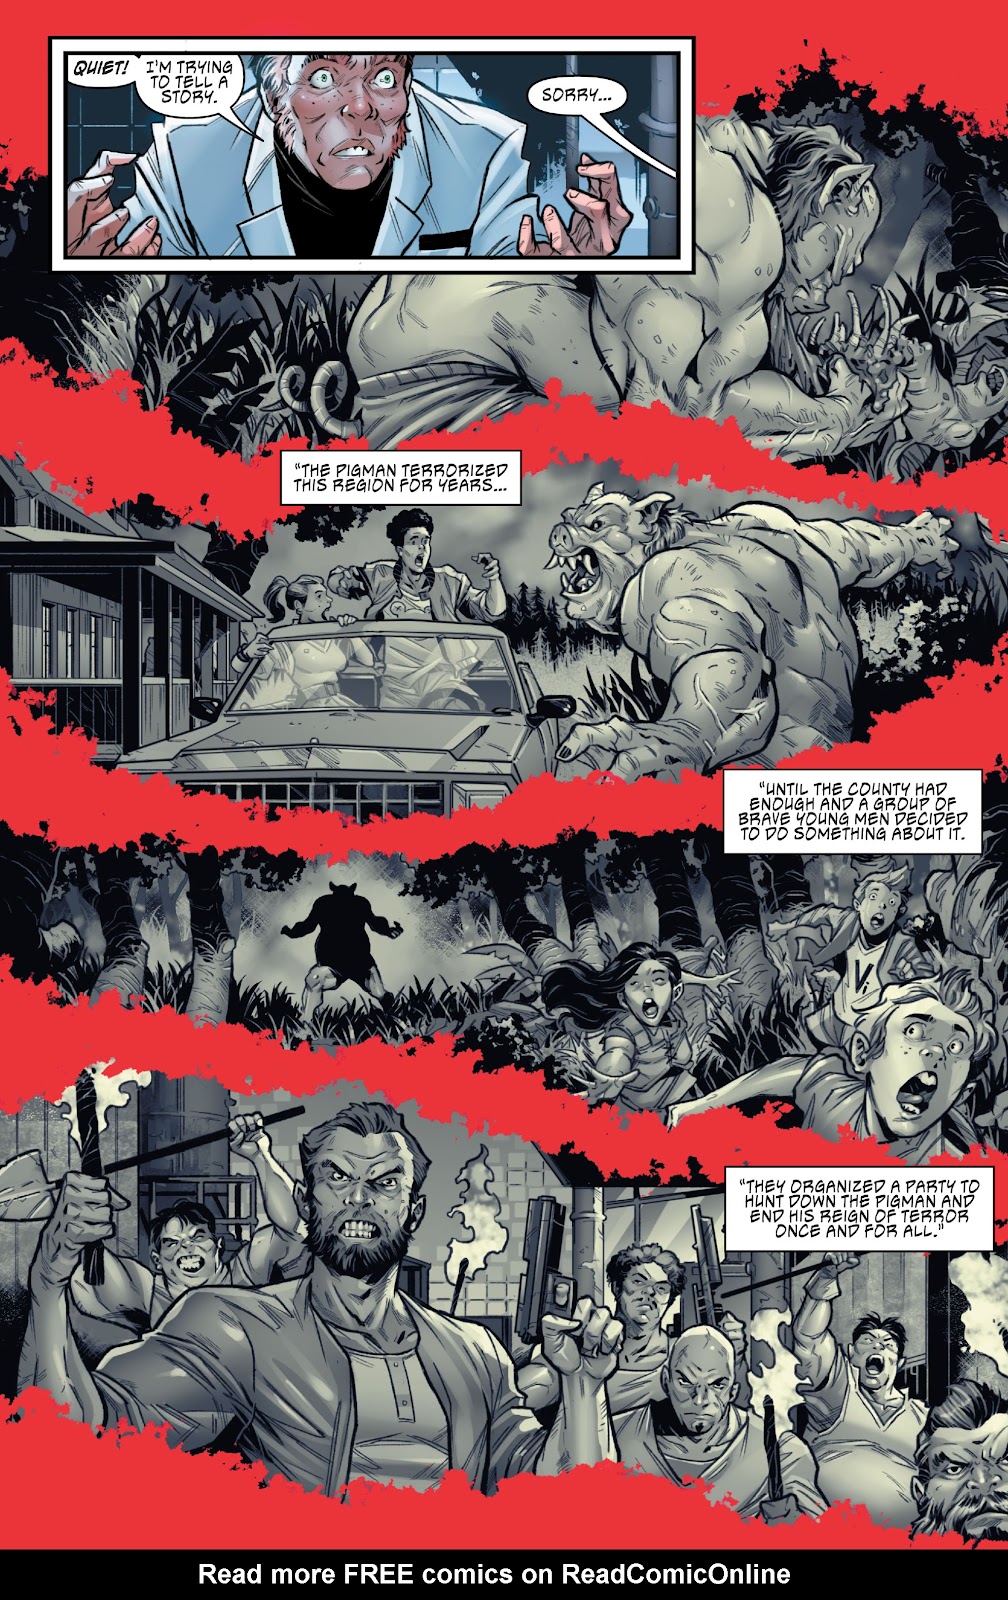 Man Goat & The Bunny Man issue 2023 Spring Special - Page 13